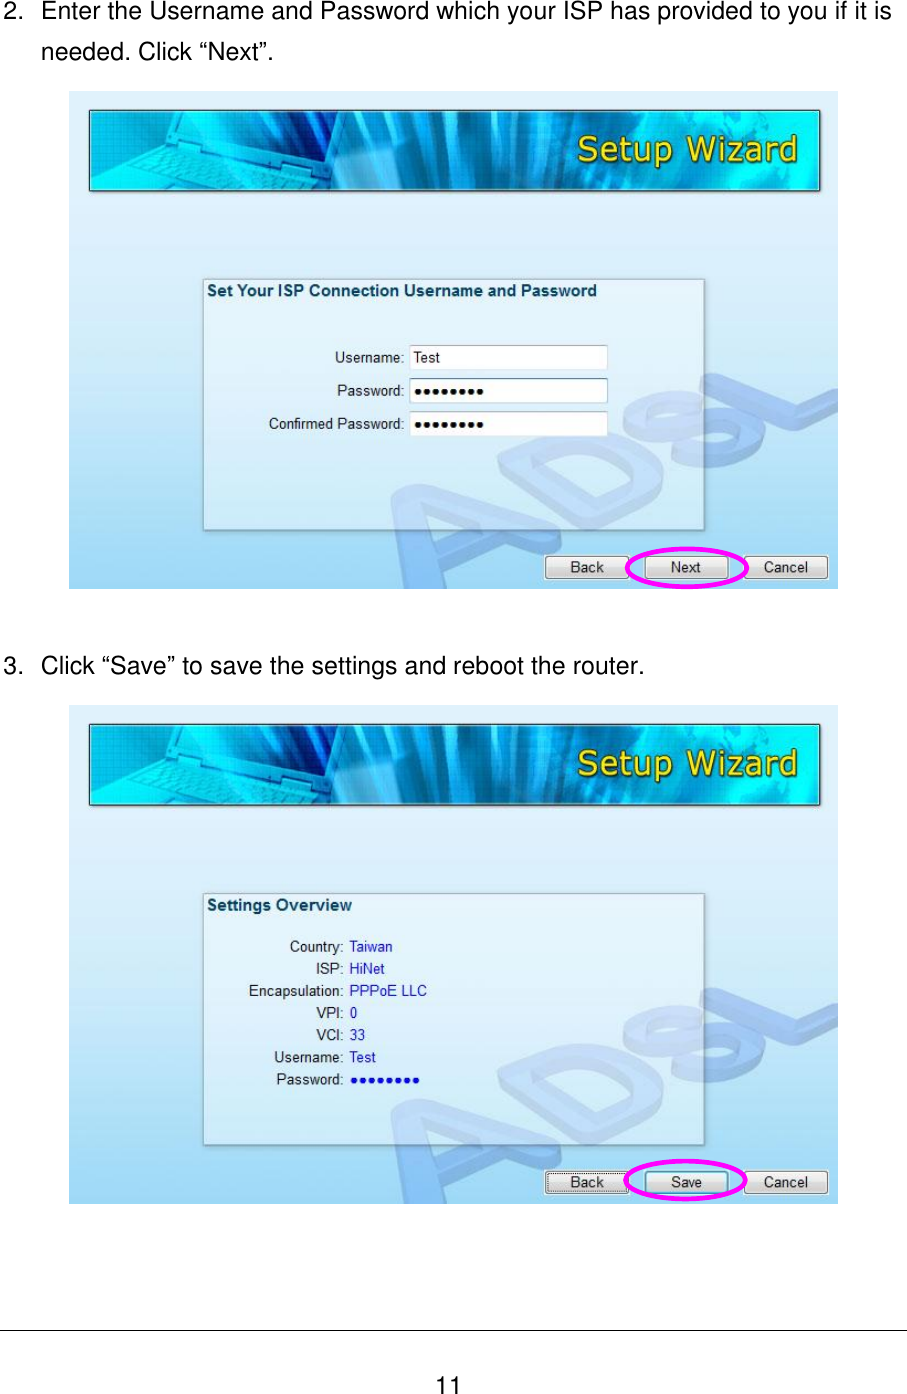   11 2.  Enter the Username and Password which your ISP has provided to you if it is needed. Click “Next”.   3.  Click “Save” to save the settings and reboot the router.      